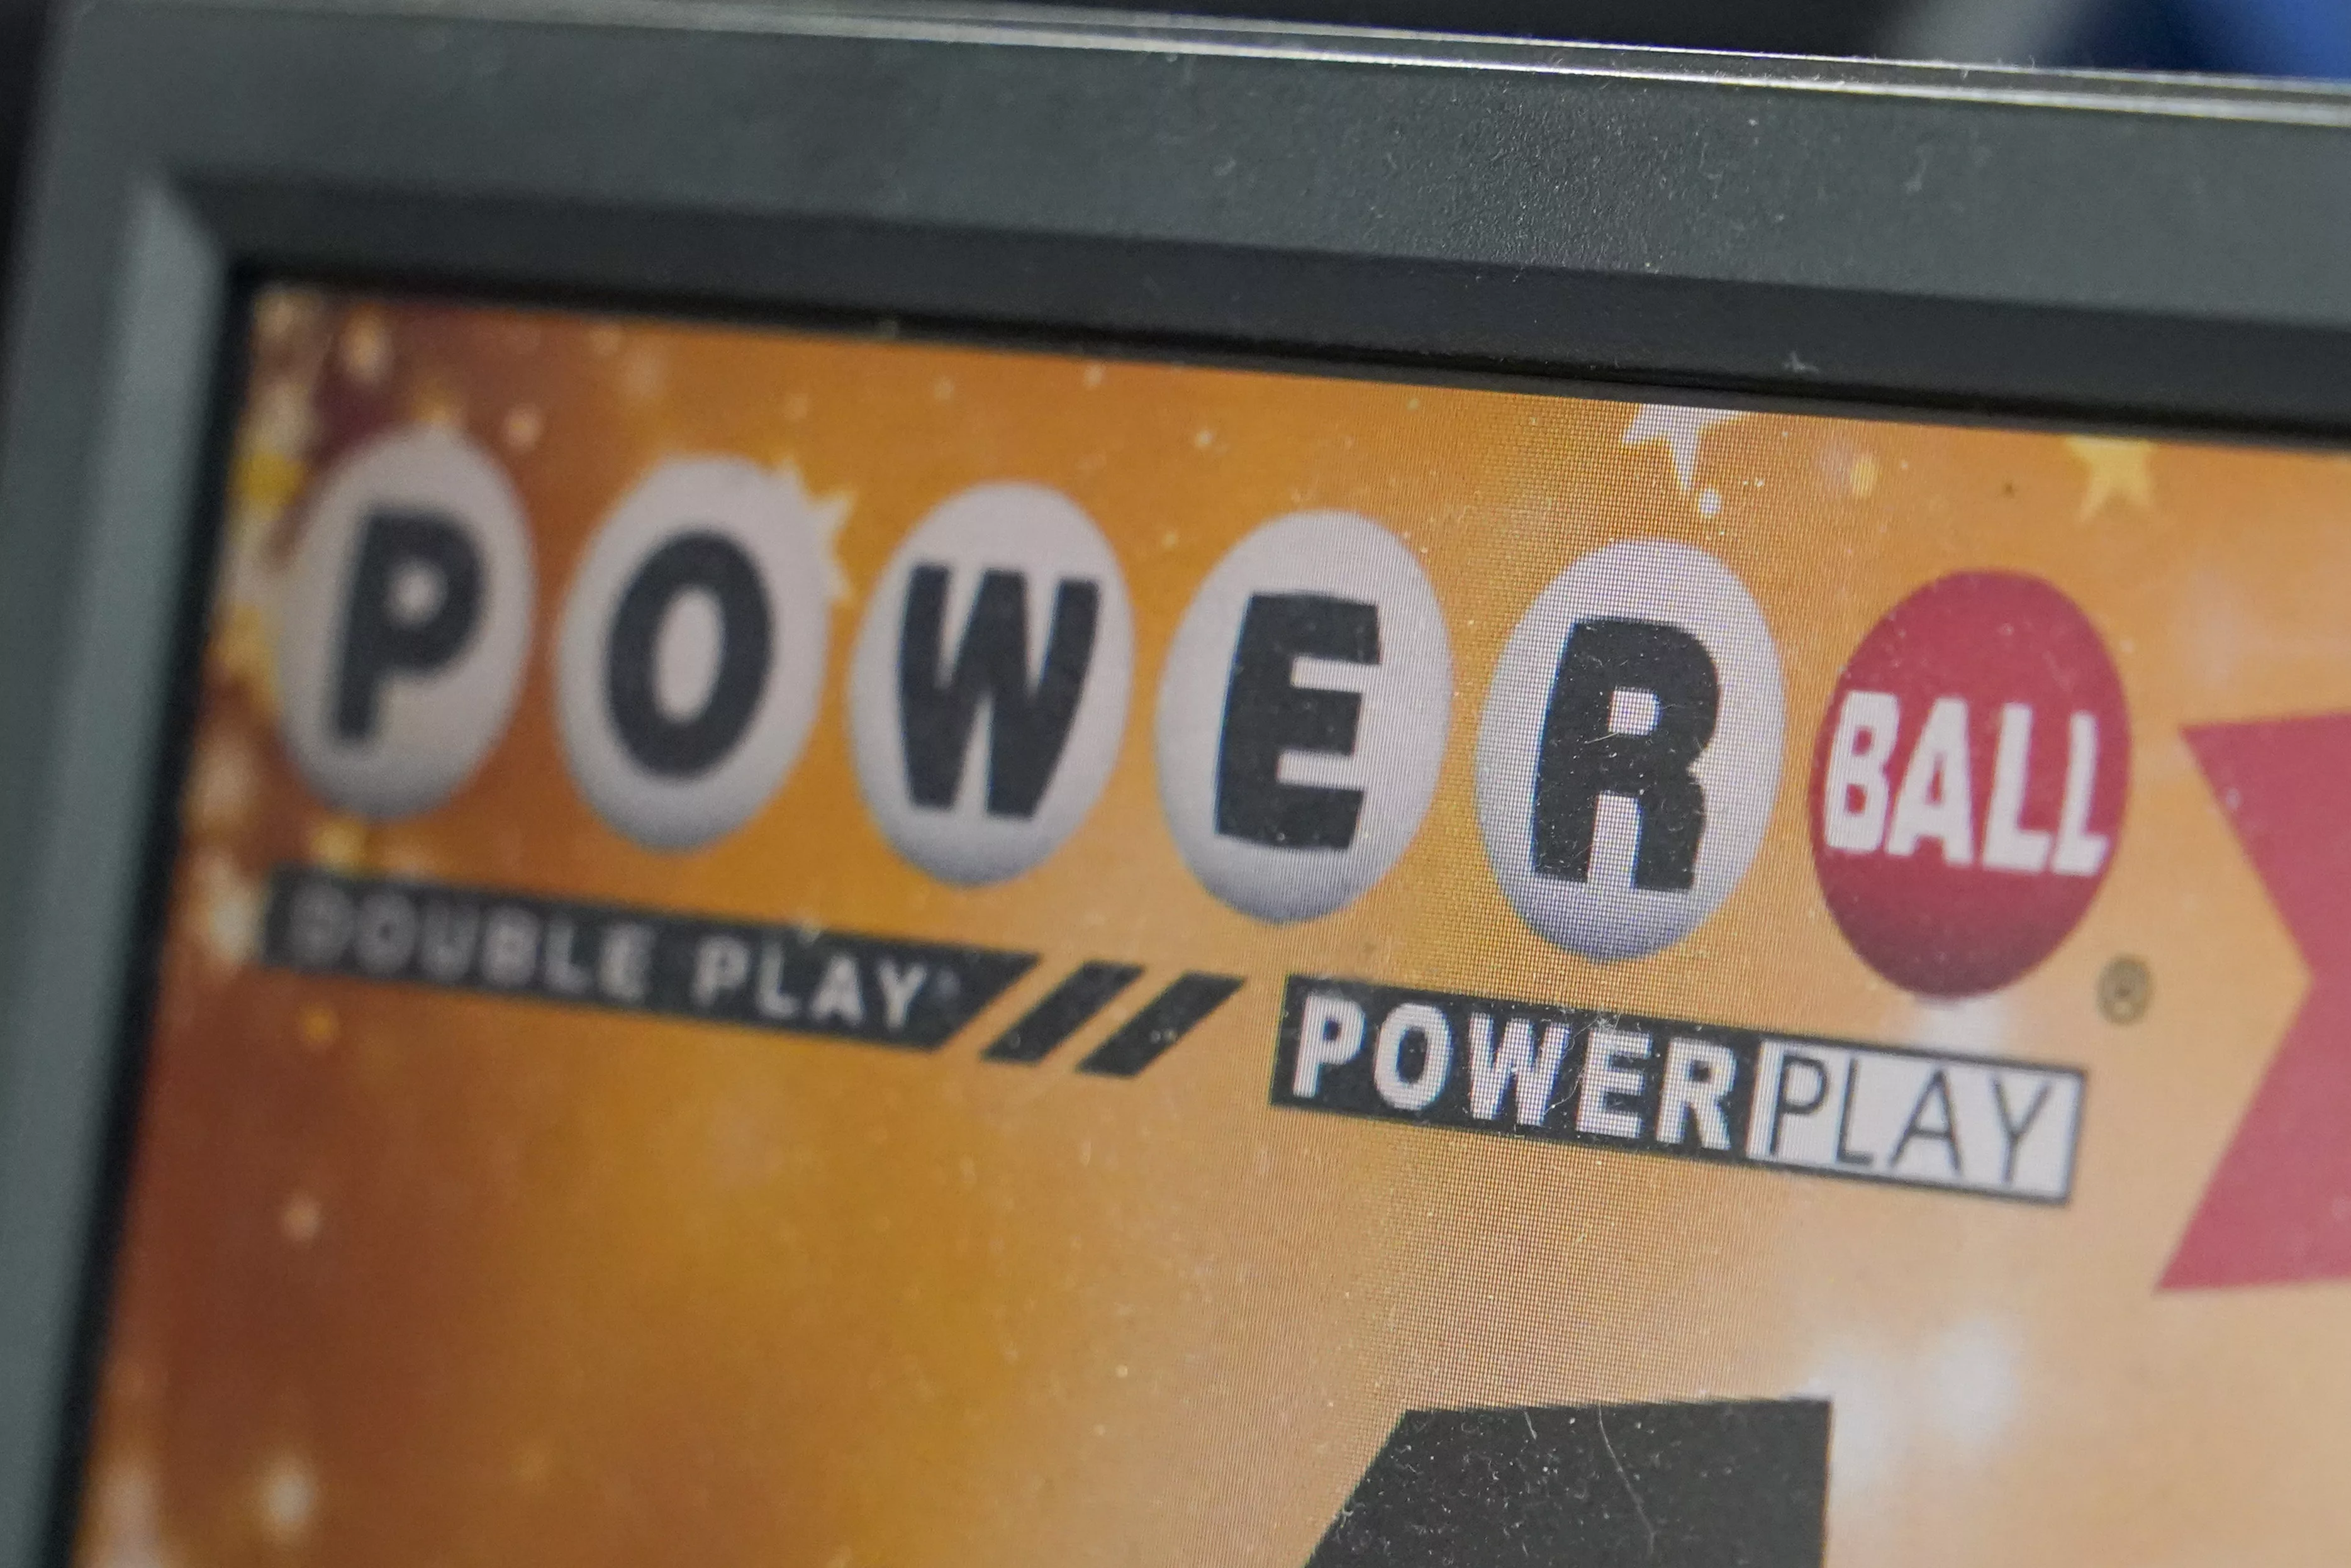 Powerball jackpot rises to 1.09 billion and stretches a 3month losing